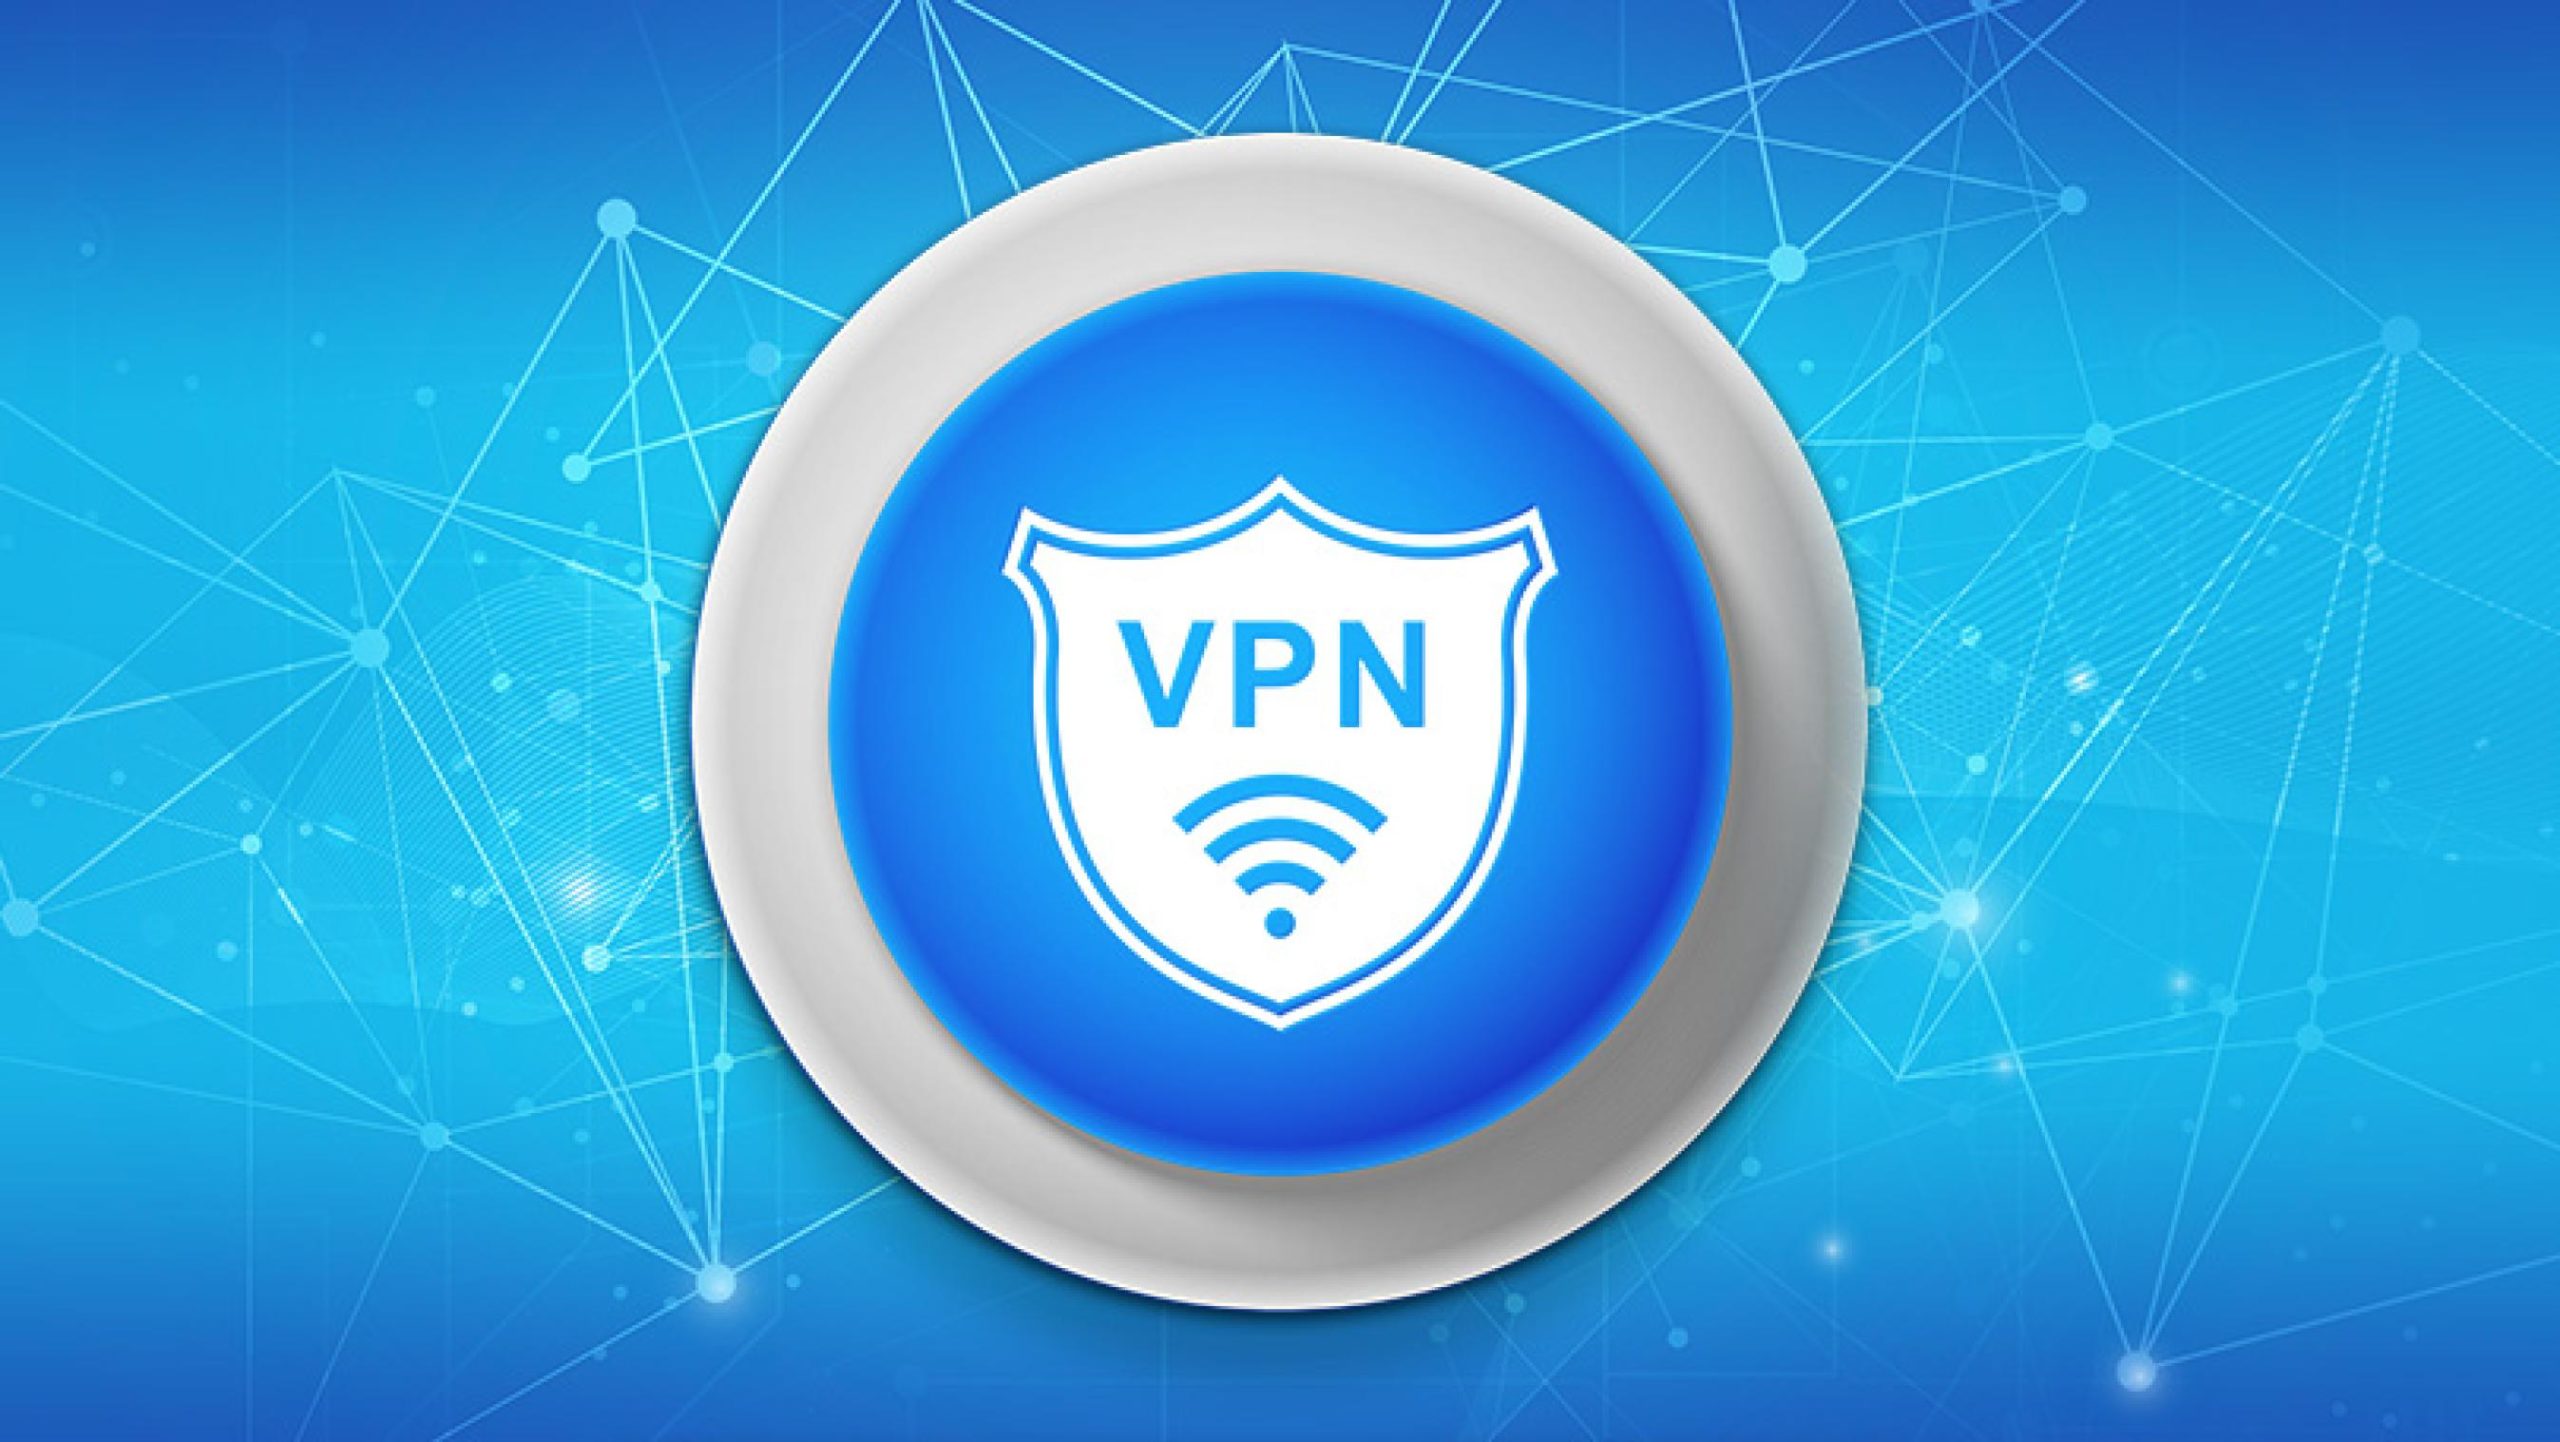 Best 7 Free VPN Apps To Use In 2020